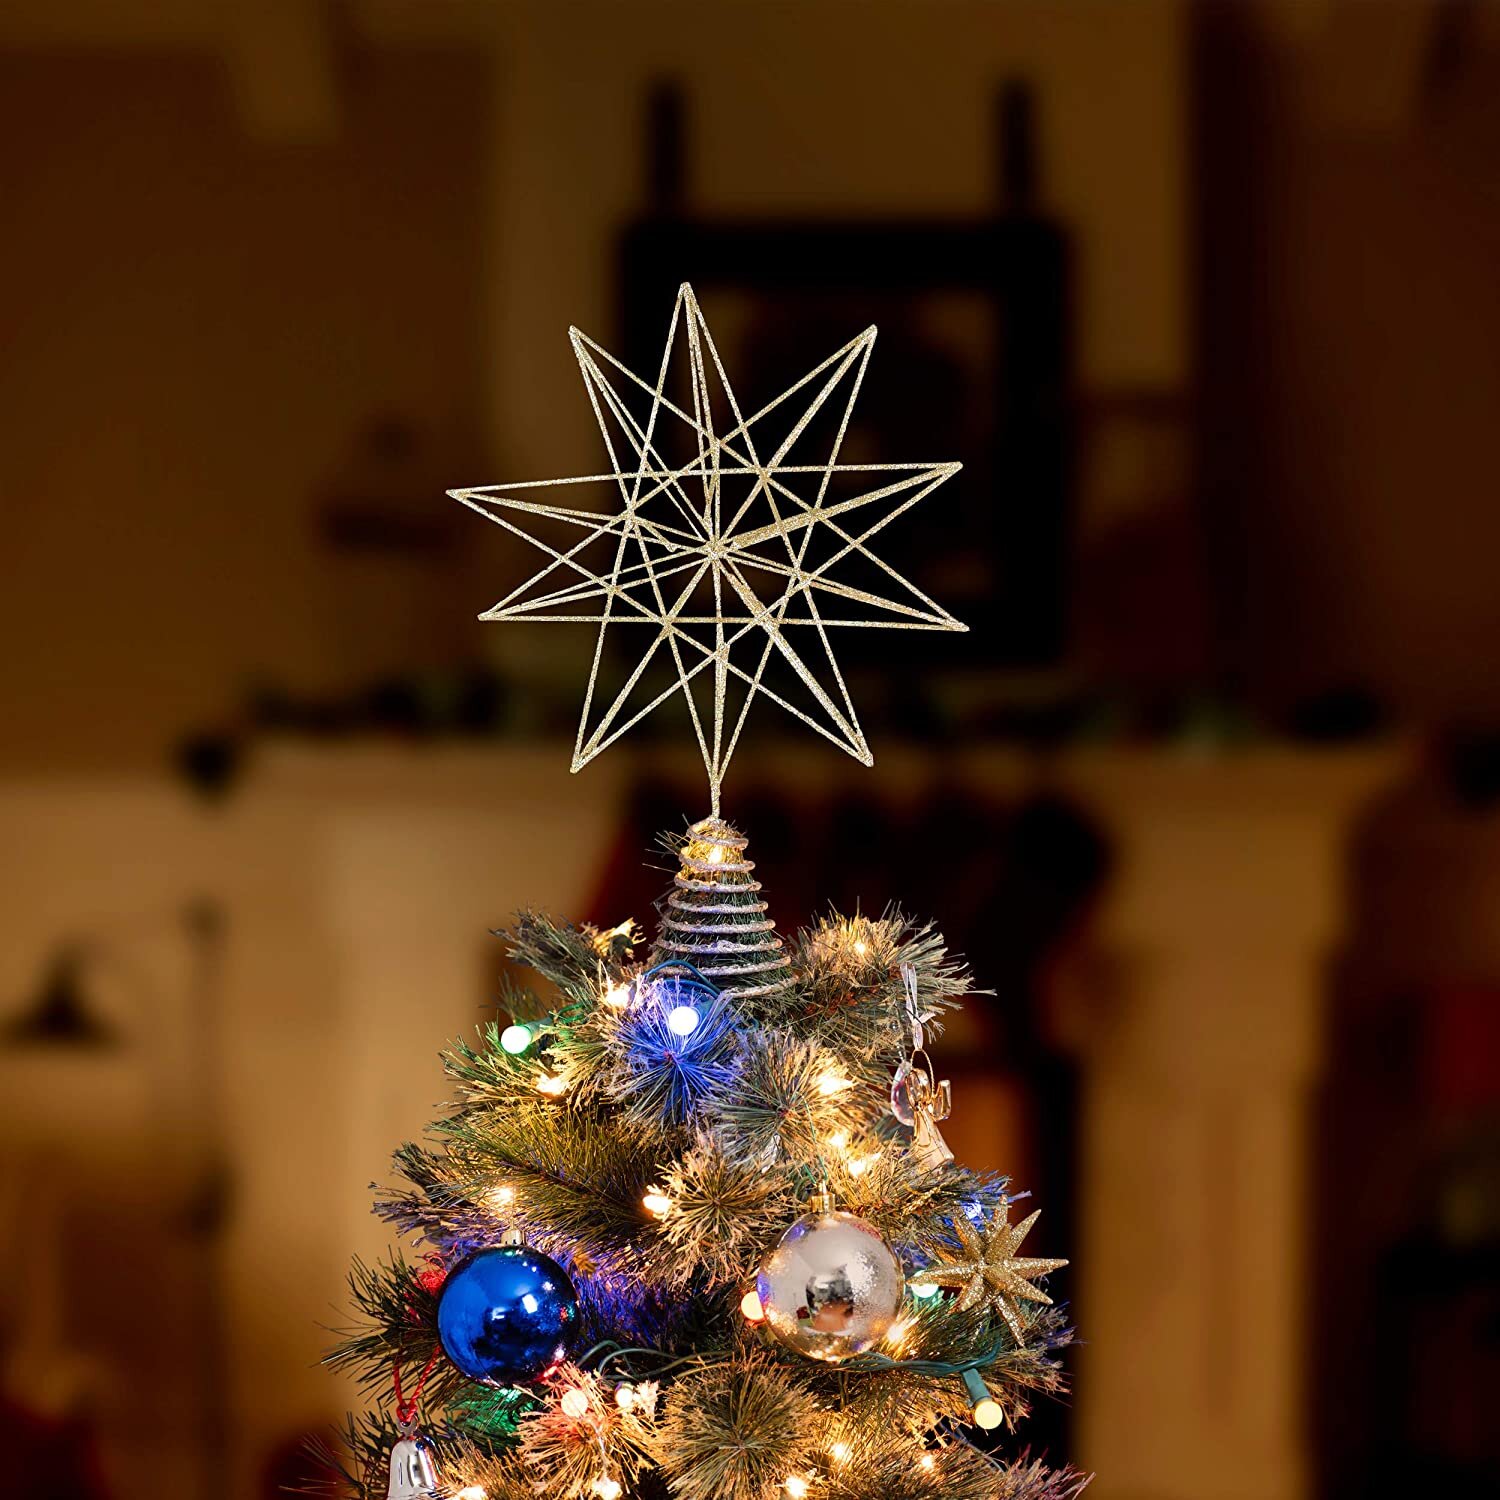 The Holiday Aisle® Metal Astrology & Stars Tree Topper